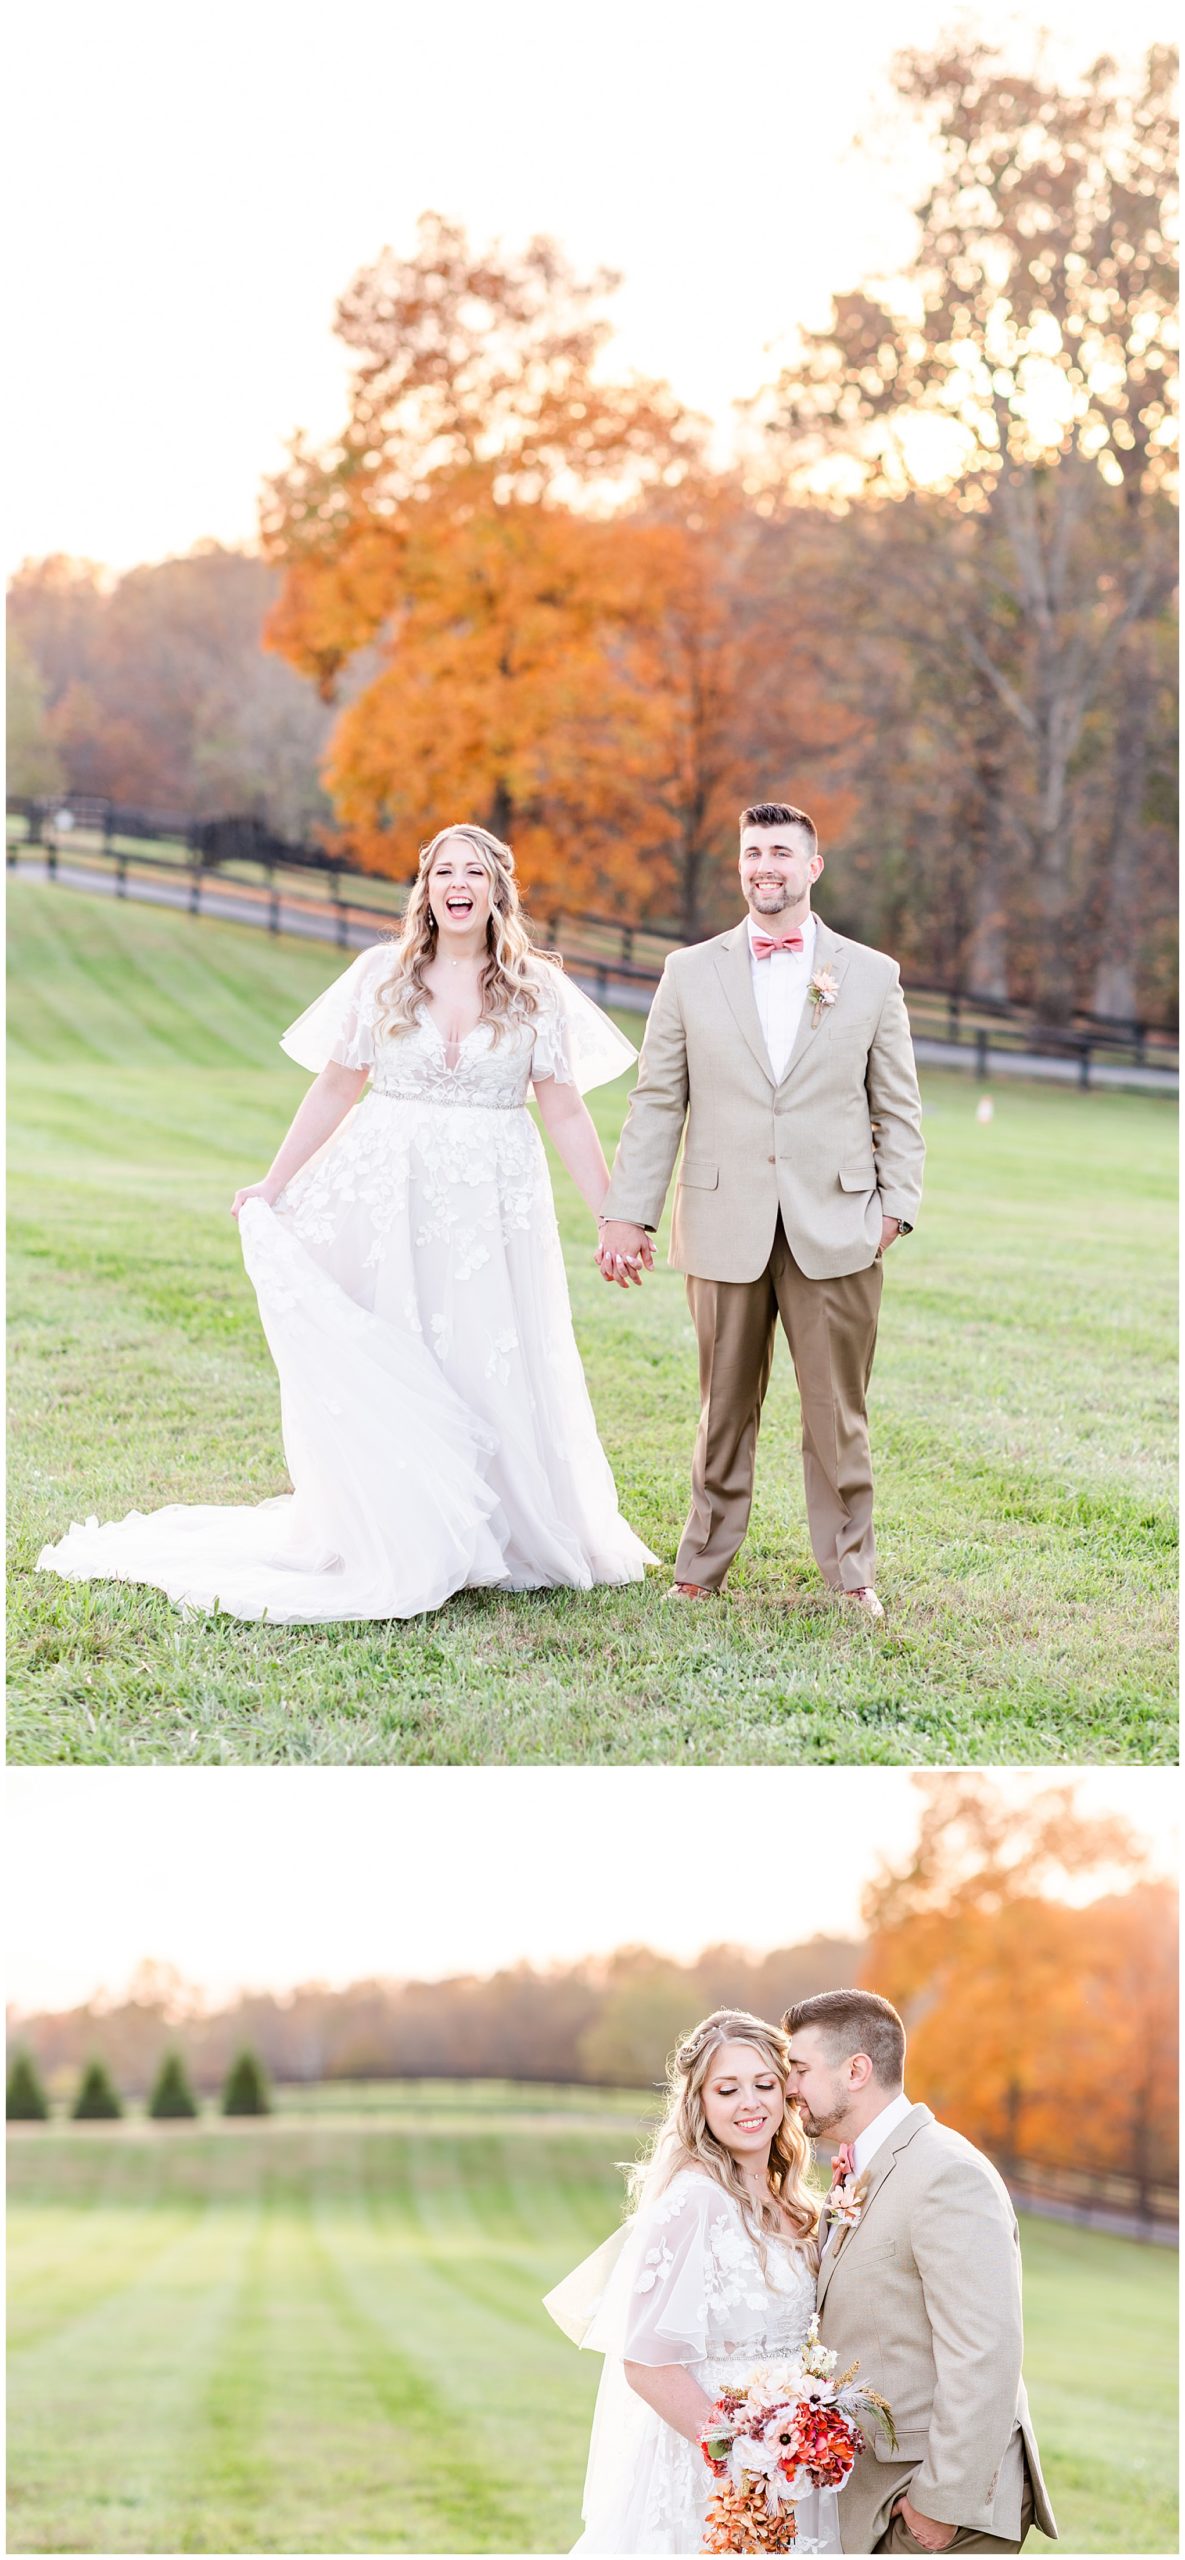 fall colors Middleburg Virginia wedding, Middleburg wedding, Middleburg wedding photographer, Loudoun County wedding photographer, northern Virginia wedding photographer, Middleburg Barn wedding, autumn wedding aesthetic, barn wedding aesthetic, elegant barn wedding, DC wedding photographer, Rachel E.H. Photography, bride and groom laughing, groom kissing bride on cheek, bride and groom in field 